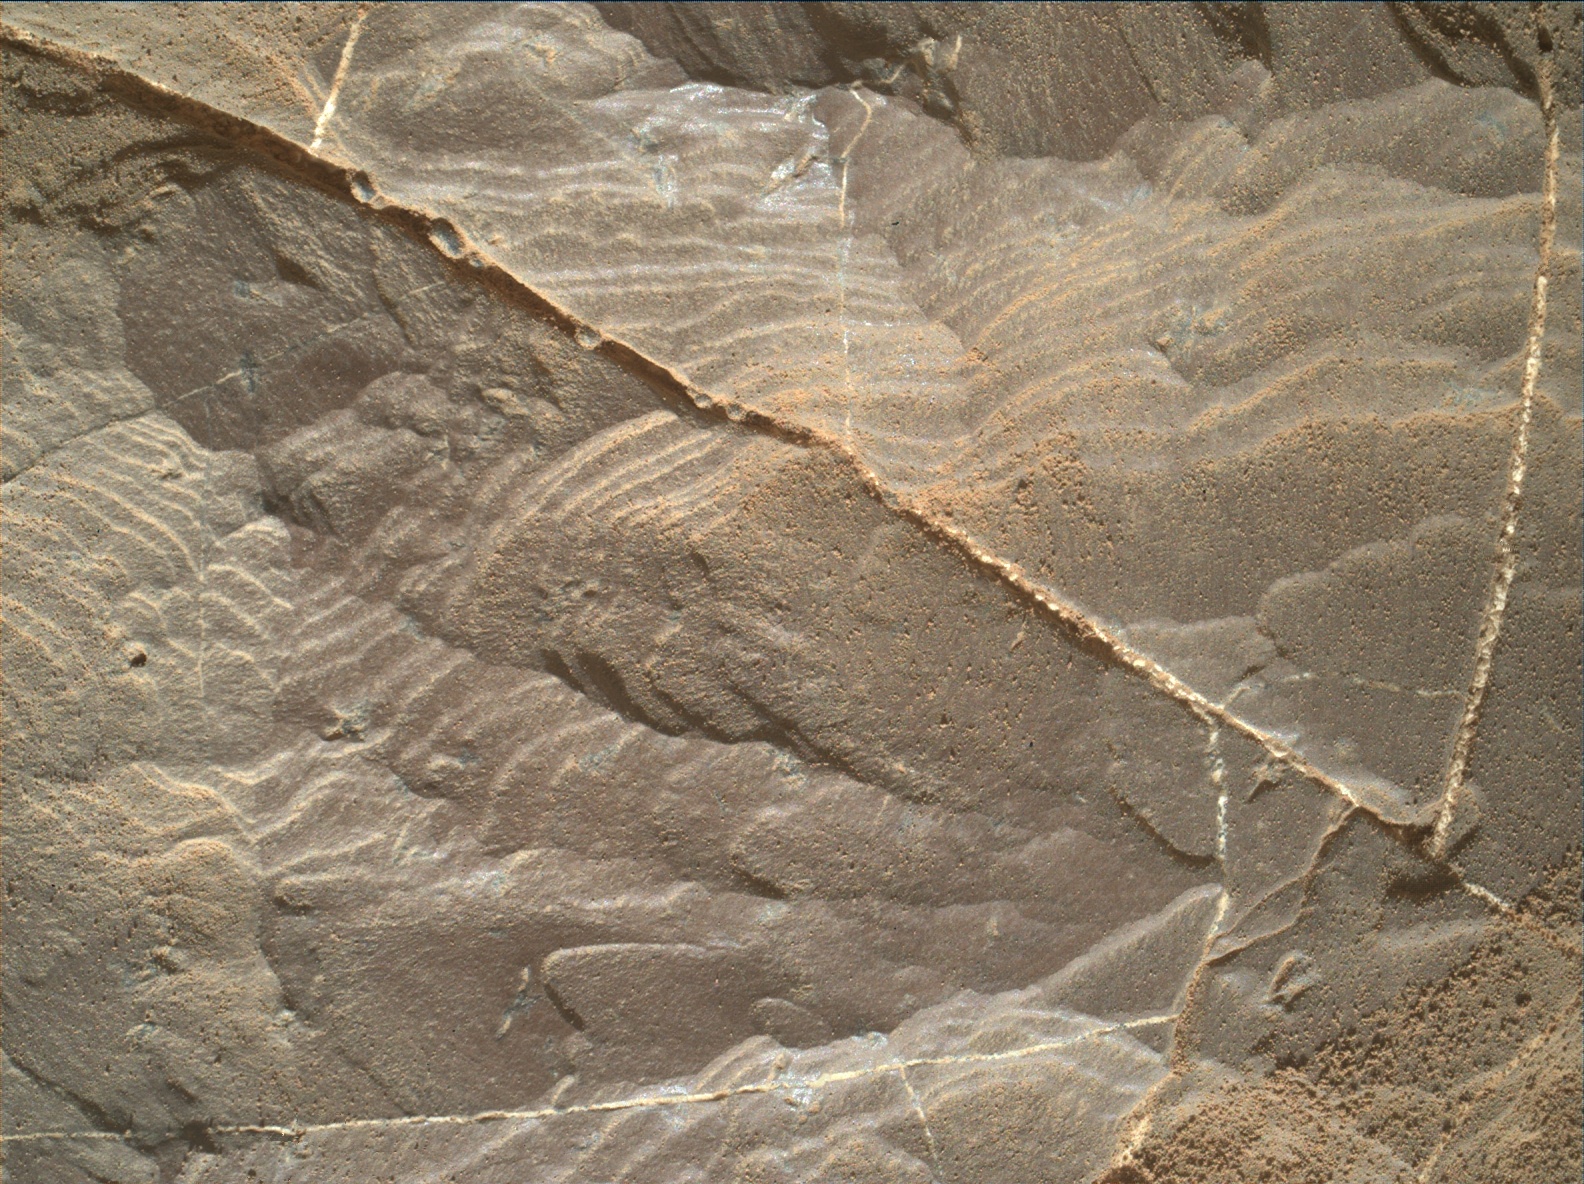 Nasa's Mars rover Curiosity acquired this image using its Mars Hand Lens Imager (MAHLI) on Sol 1894